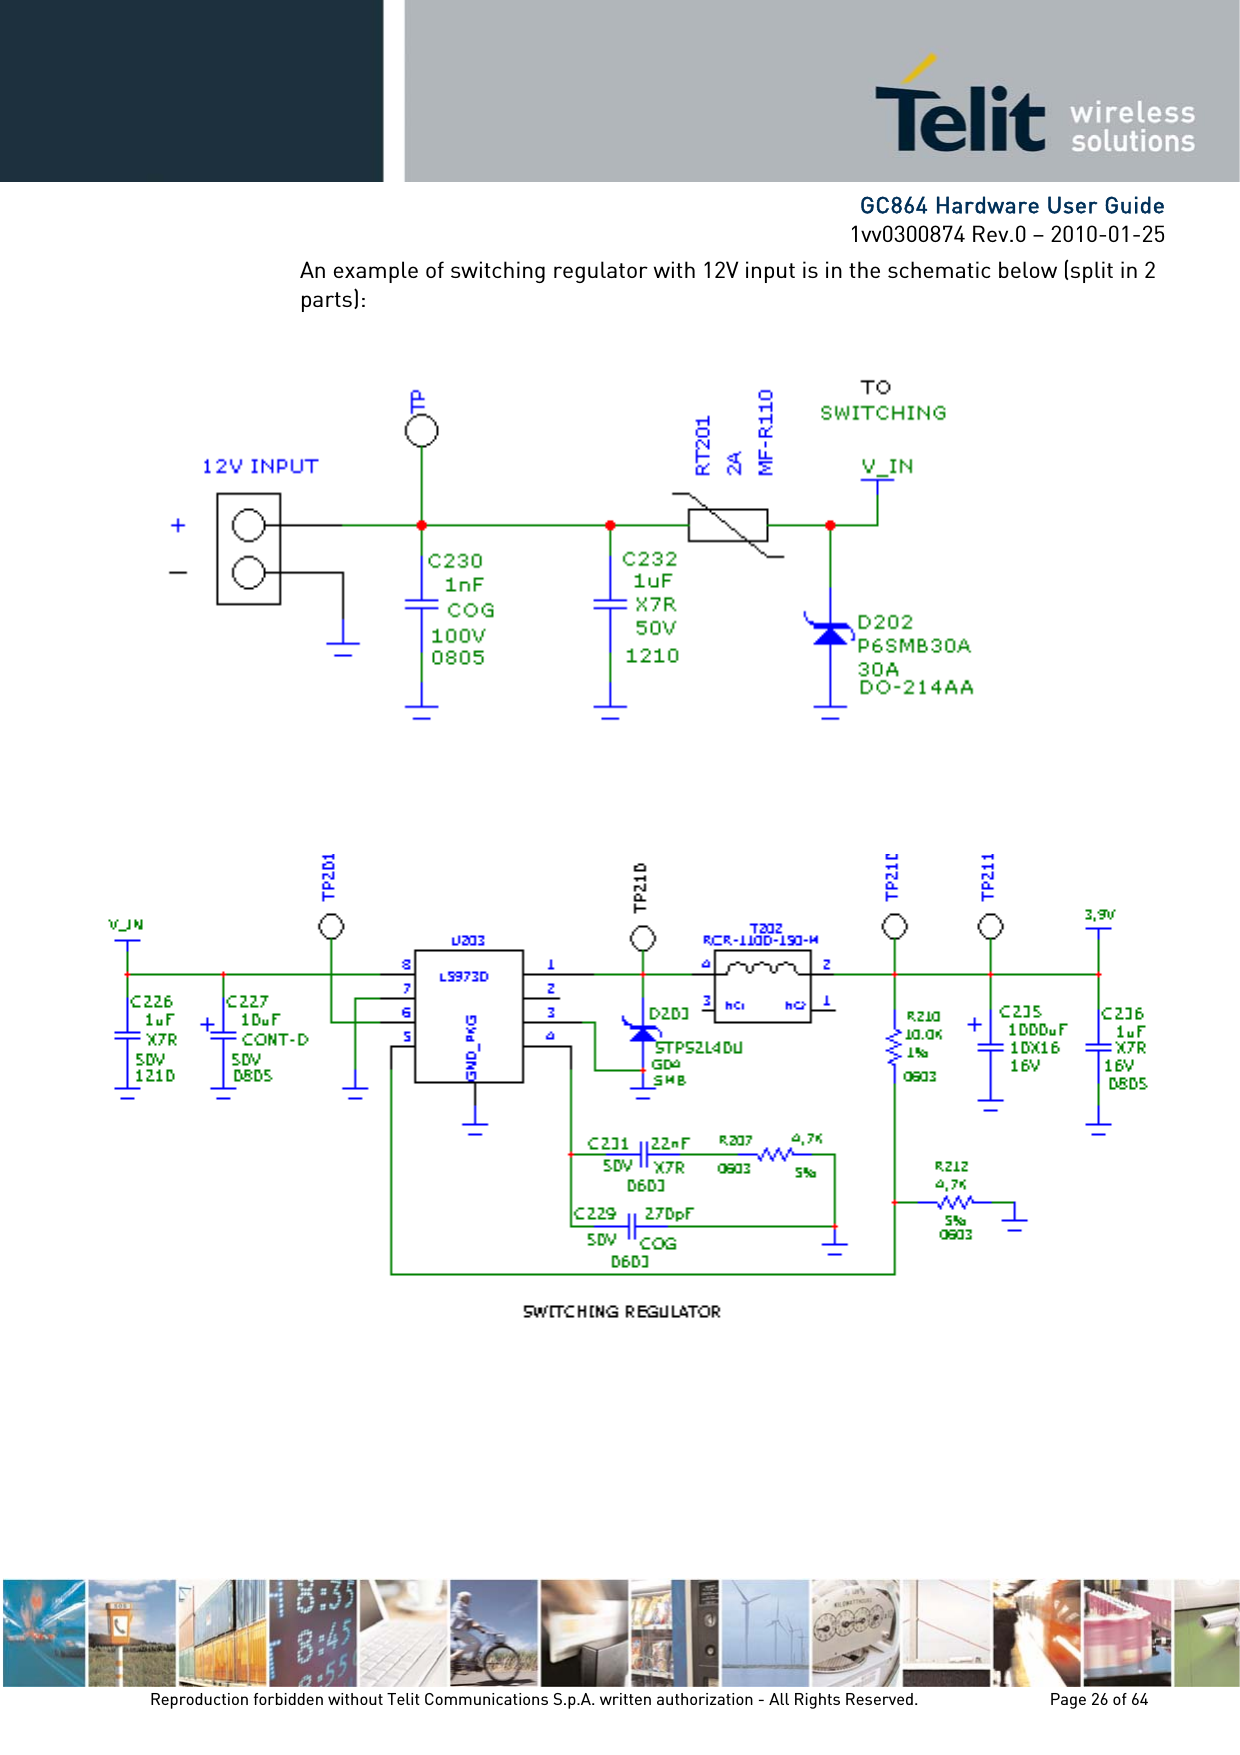      GC864 Hardware User Guide 1vv0300874 Rev.0 – 2010-01-25 Reproduction forbidden without Telit Communications S.p.A. written authorization - All Rights Reserved.    Page 26 of 64  An example of switching regulator with 12V input is in the schematic below (split in 2 parts):                  